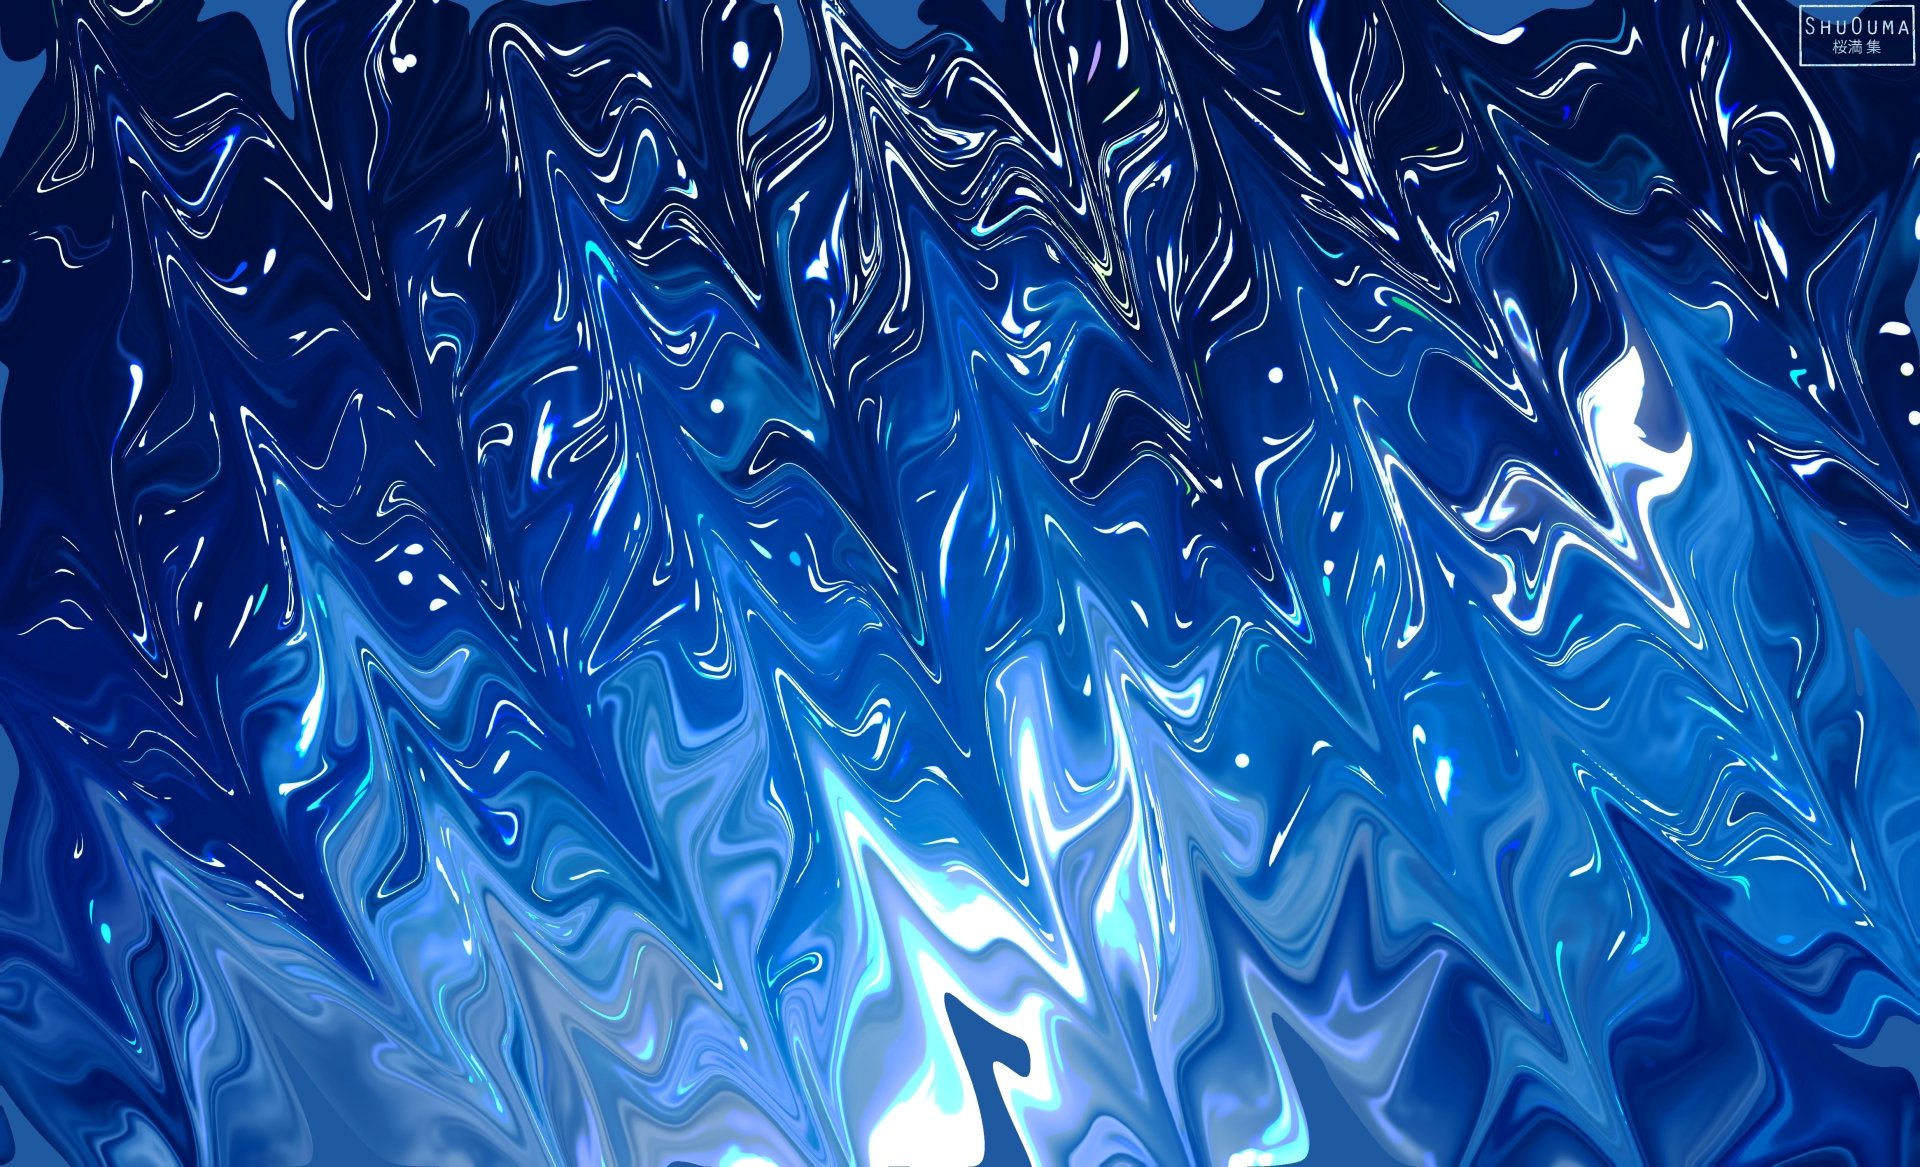 Abstract Blue 4k Ultra HD Wallpaper by ShuOuma